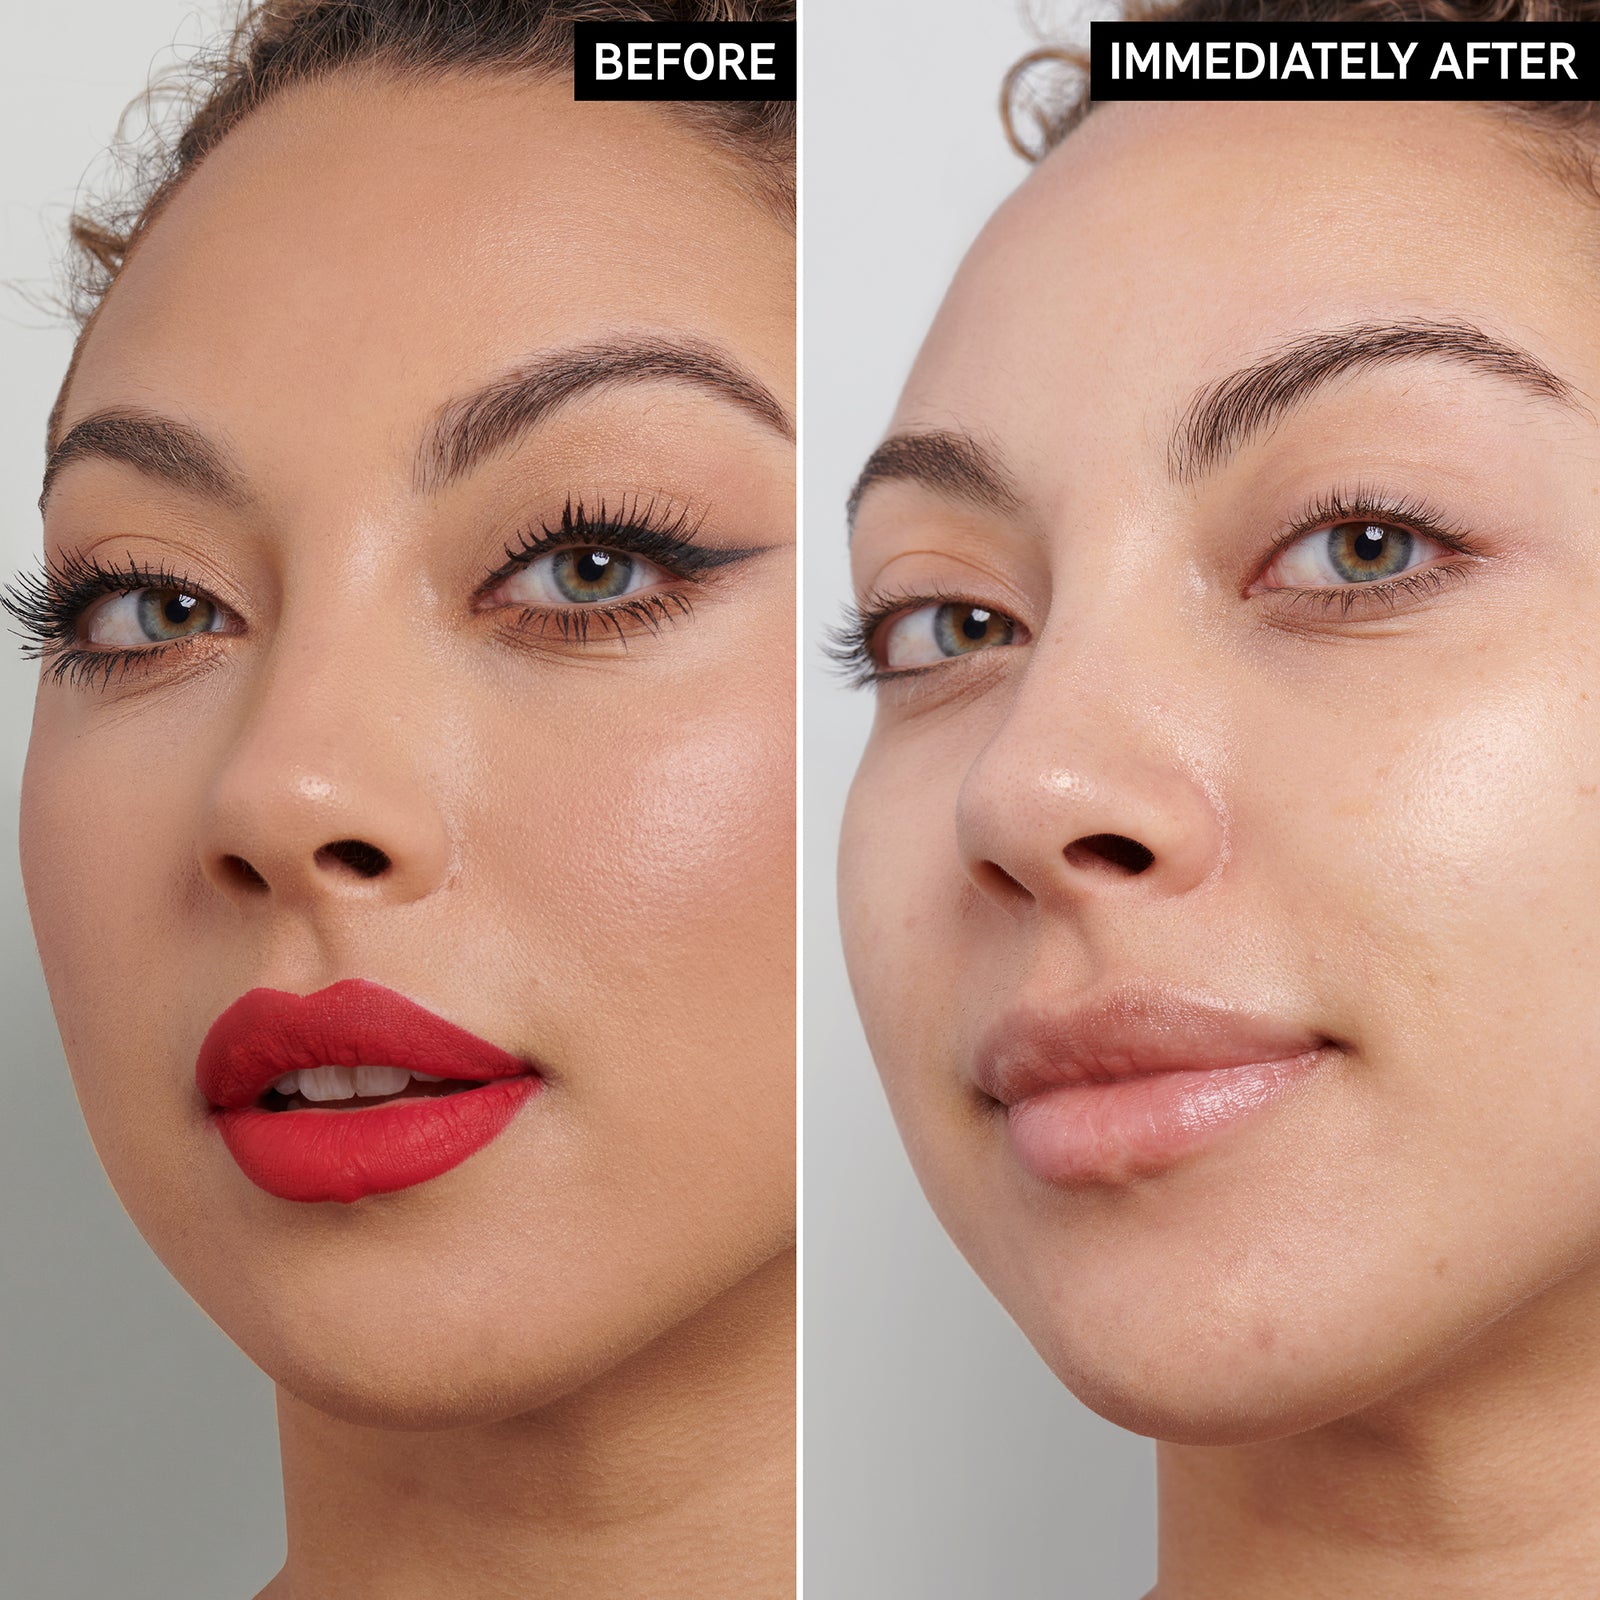 Two images of a model's face, side by side to show before and after taking makeup off and cleansing with Oat Cleansing Balm